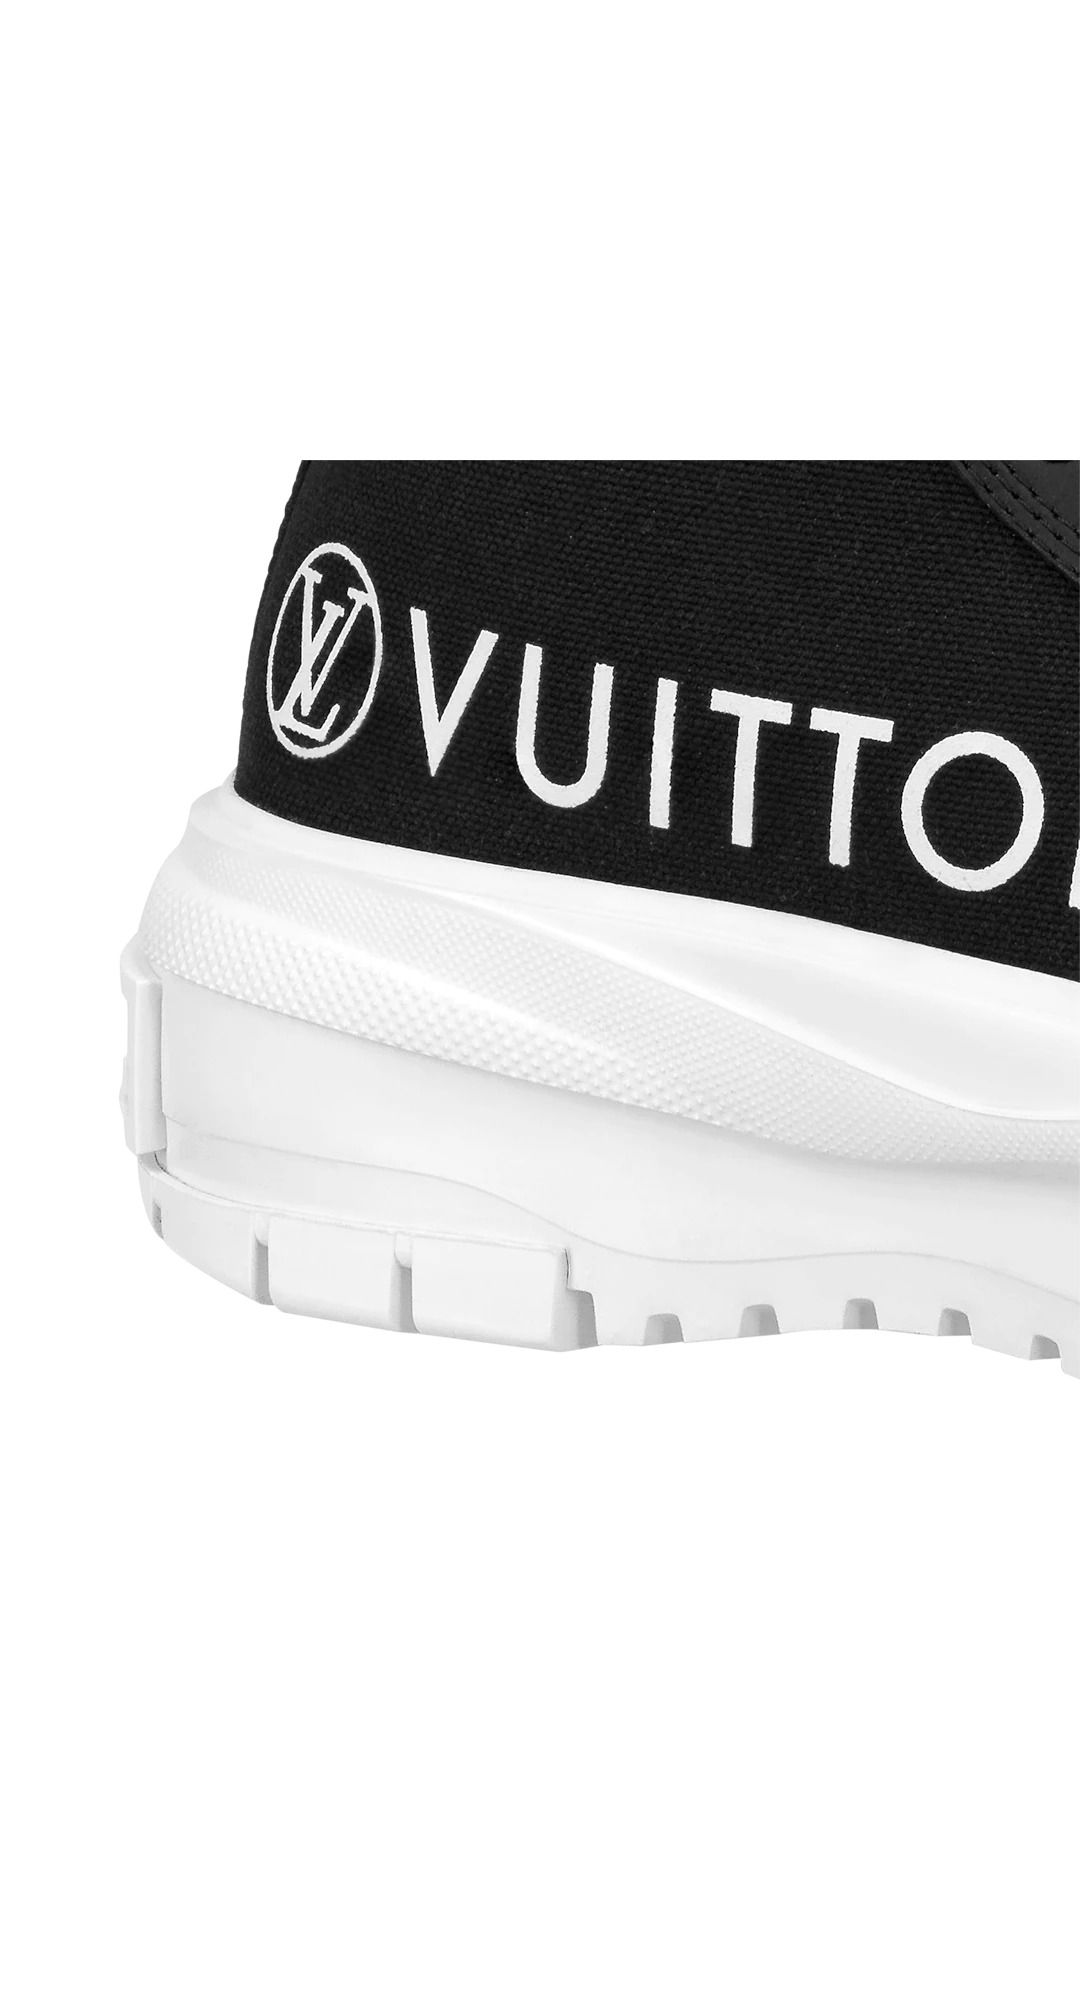 Louis Vuitton Trainers Black White SS22 Sneakers LV size 10 | eBay